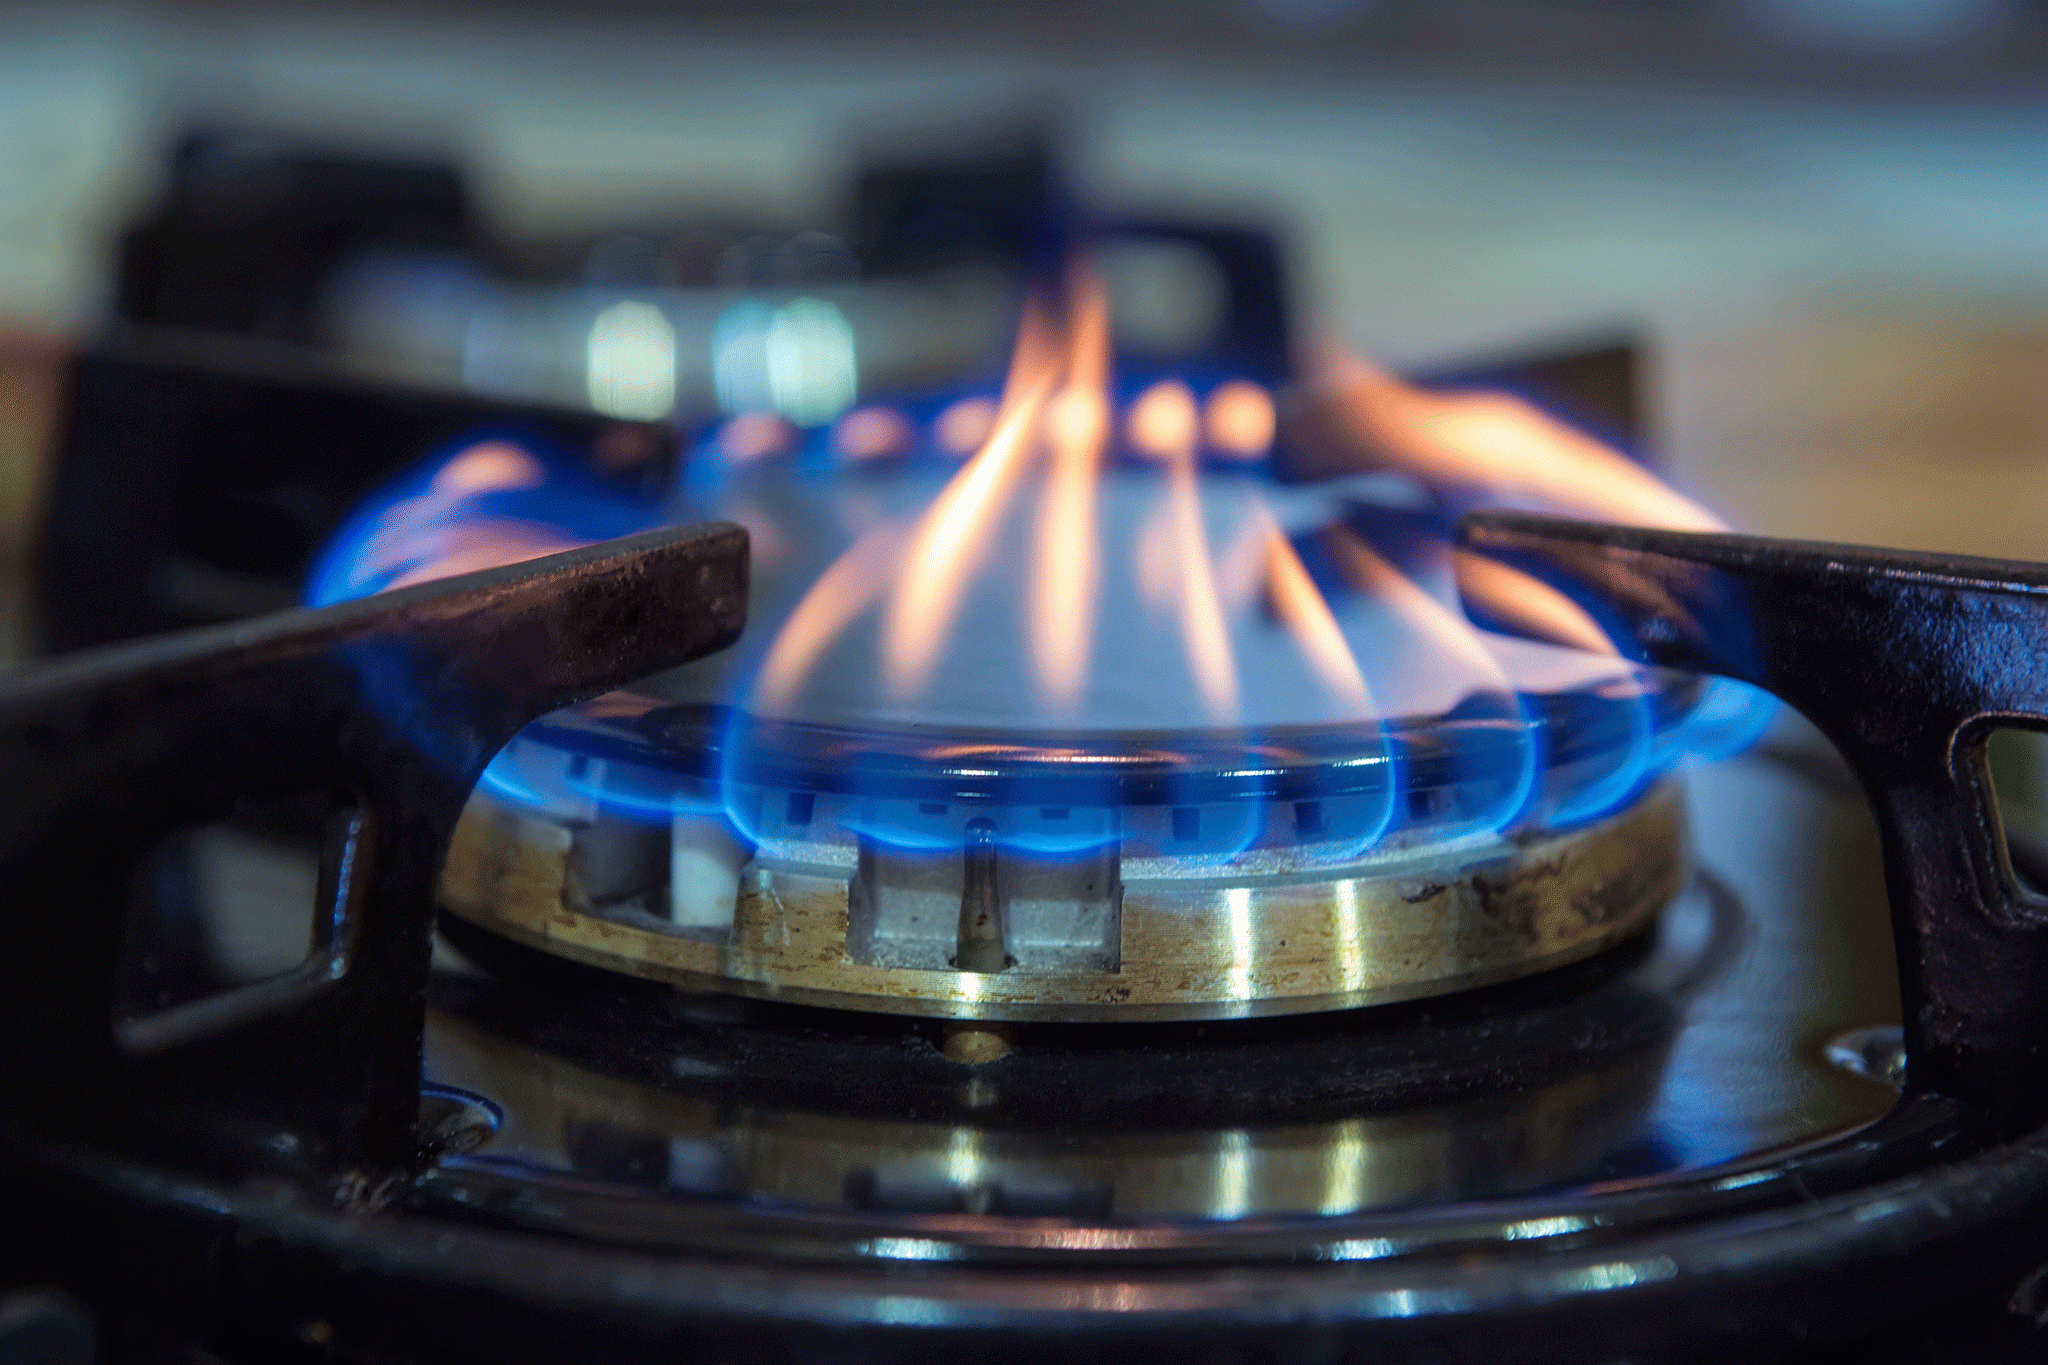 Gas and electricity bills are still causing too many headaches